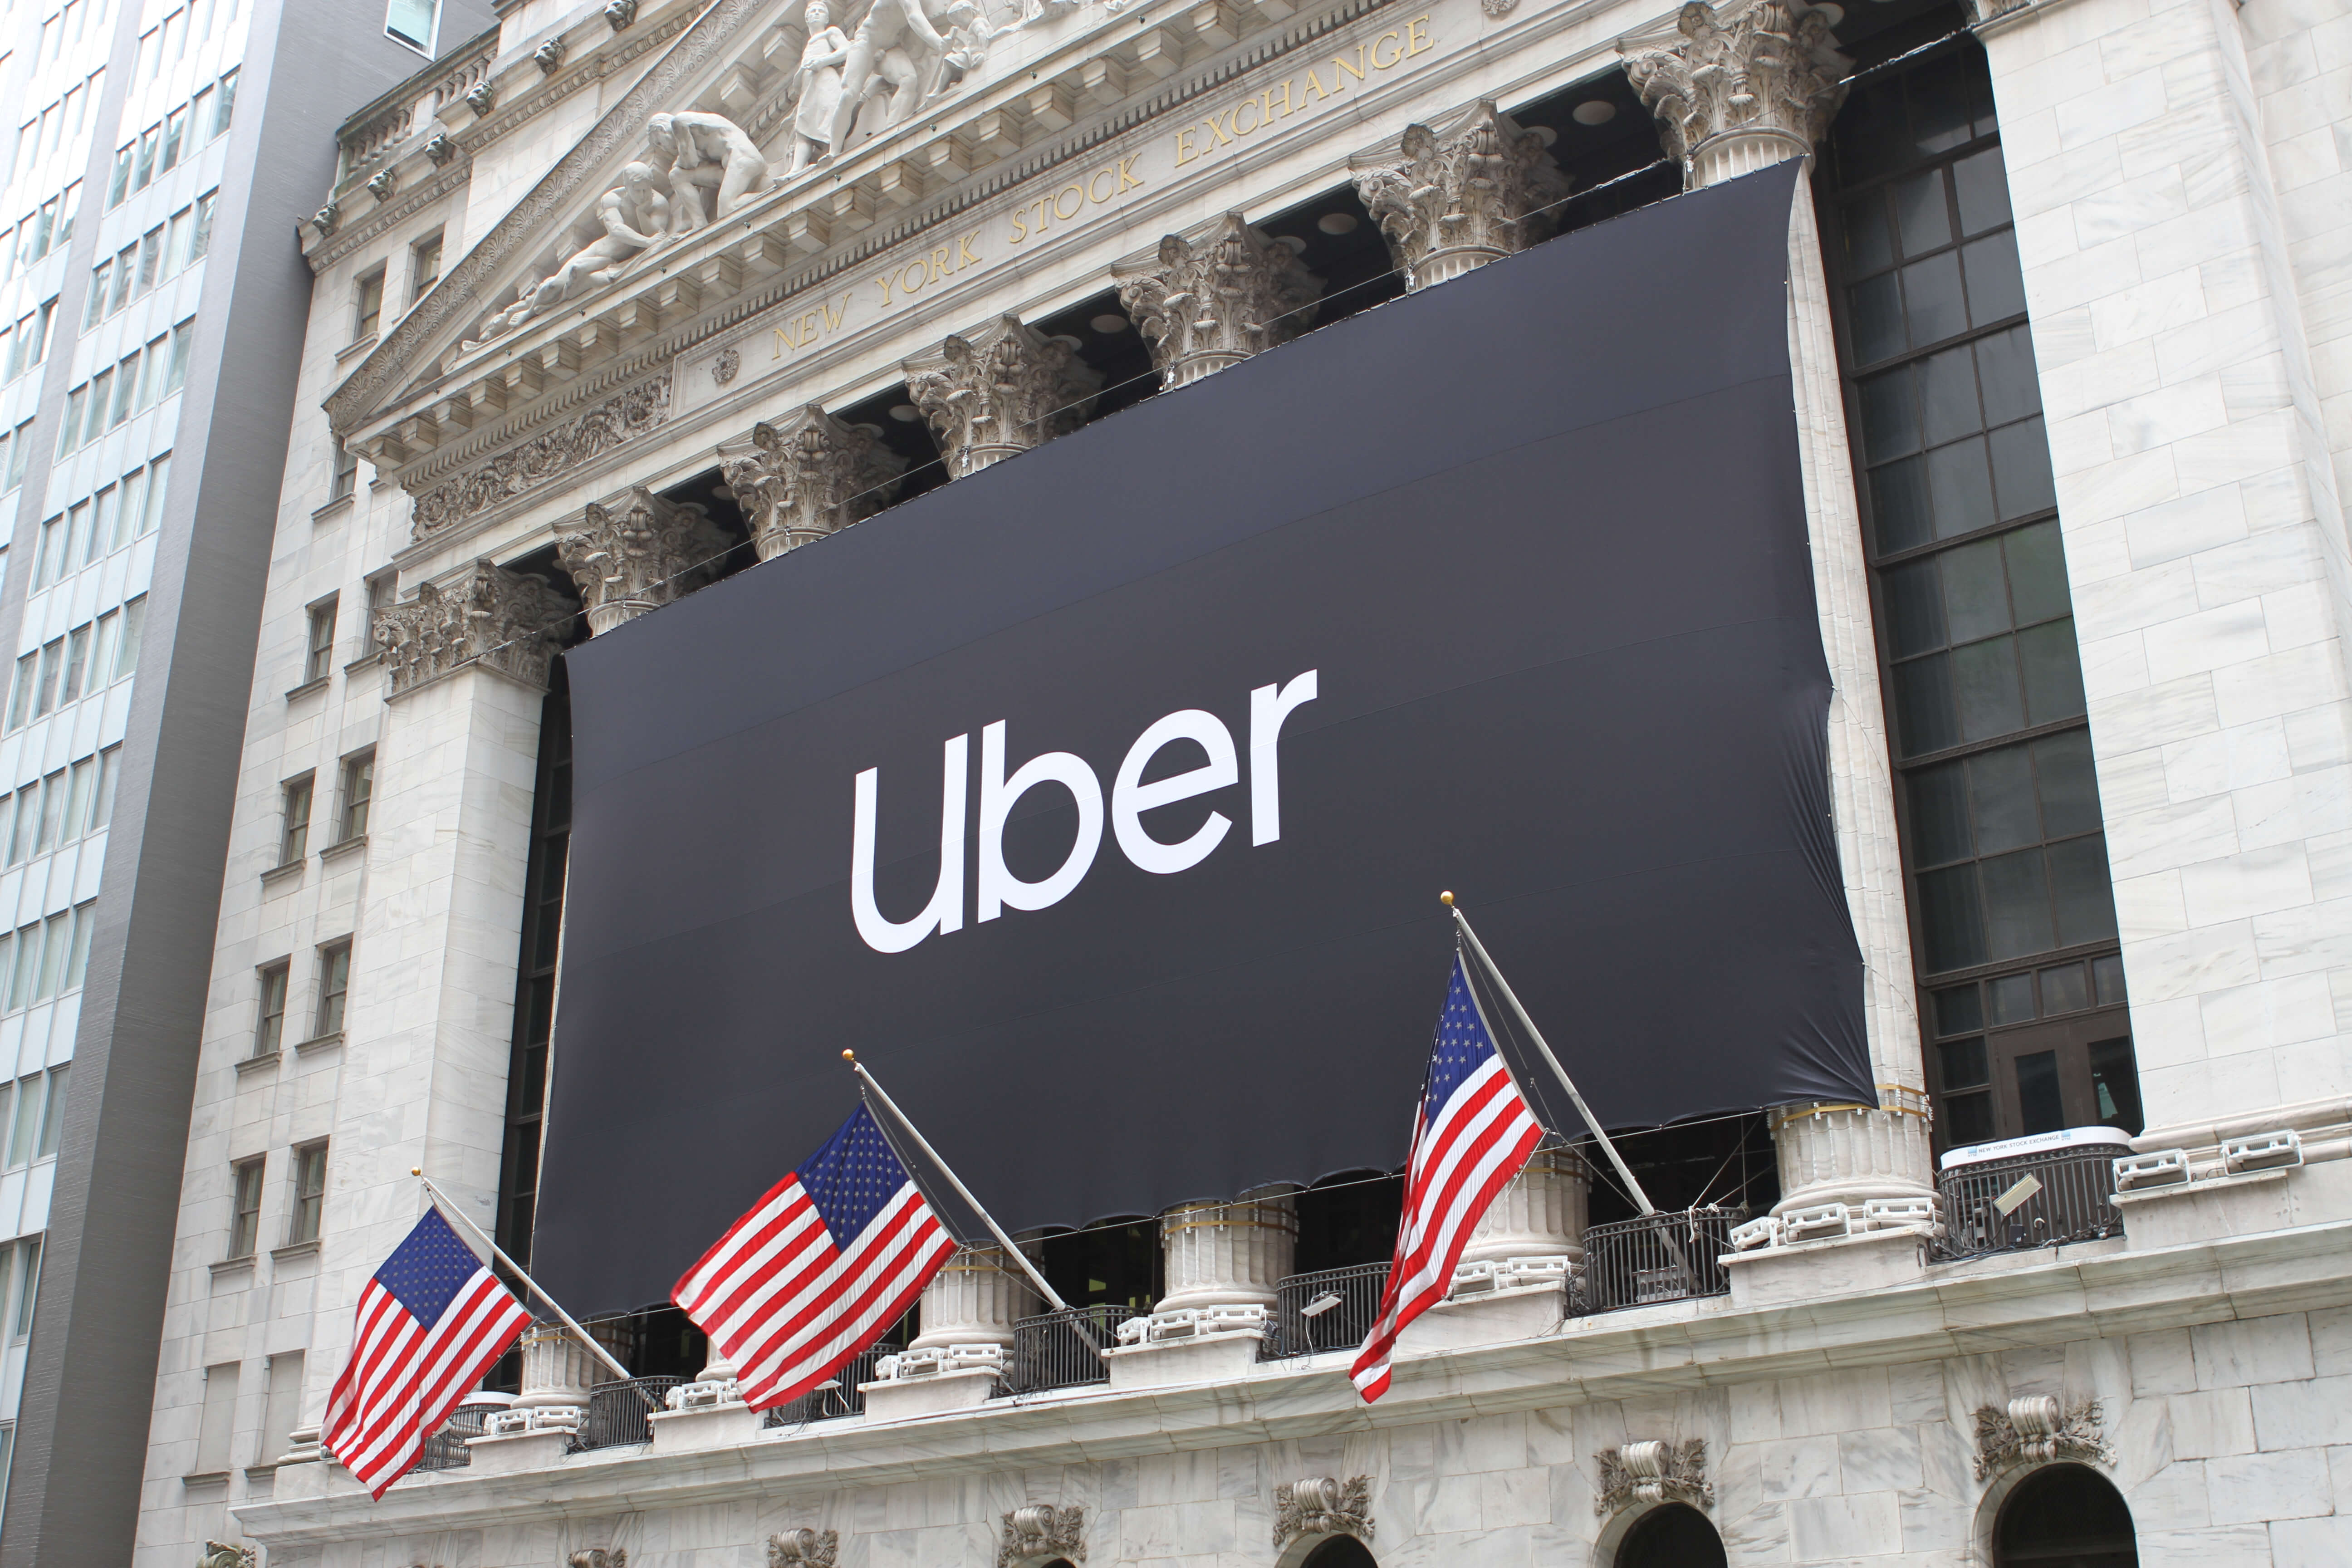 ber Technologies Inc. (NYSE: UBER) becomes a public company via an initial public offering IPO